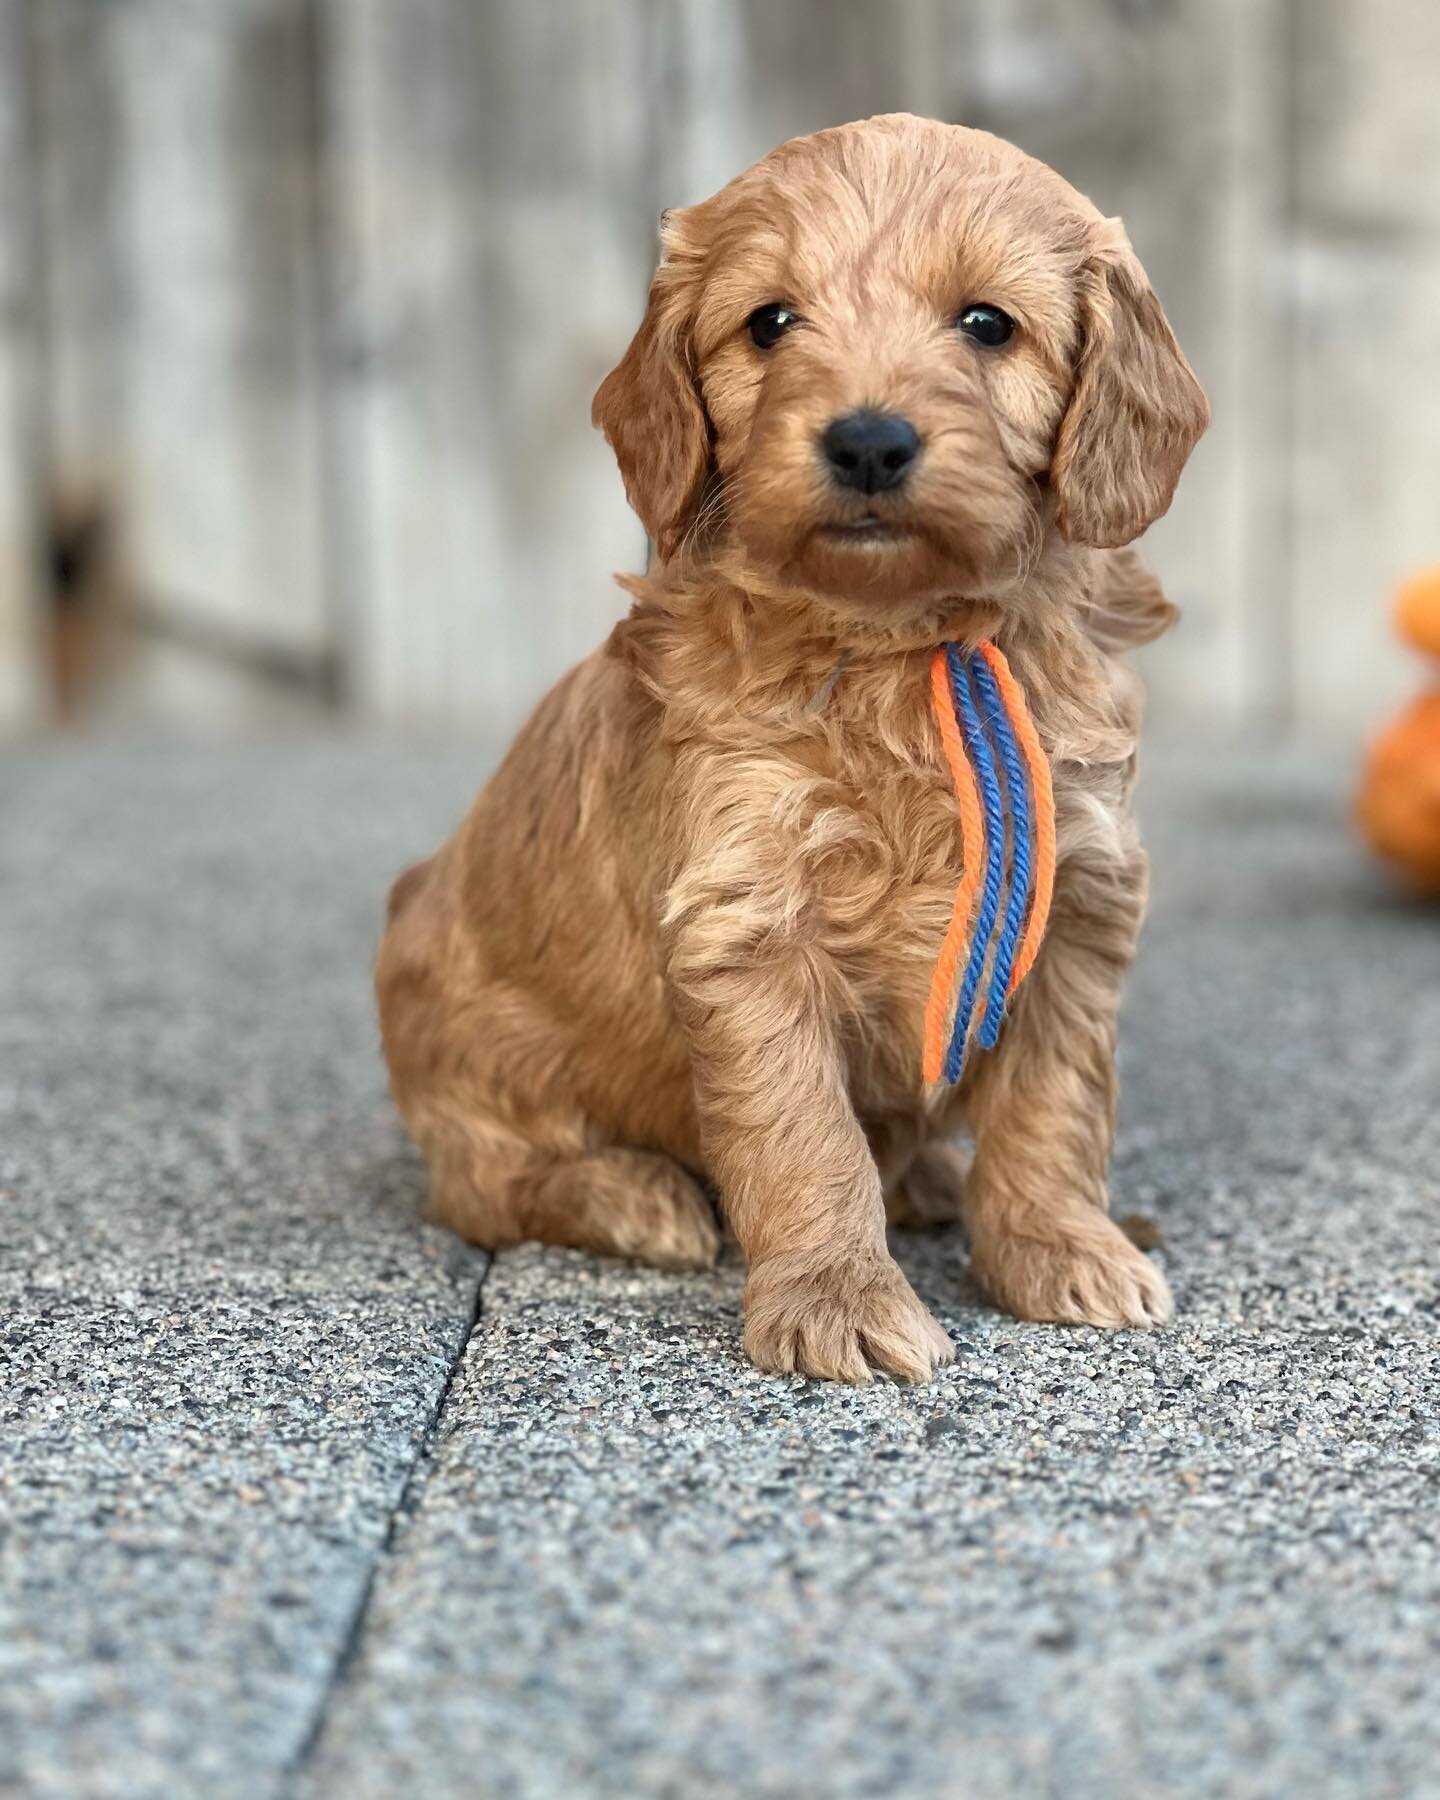 in need of puppy love? 
we got you covered 👌💗
F1 Mini Goldendoodles available this summer ☀️
#winecountrygoldendoodles #WCGD #goldendoodlesofinstagram